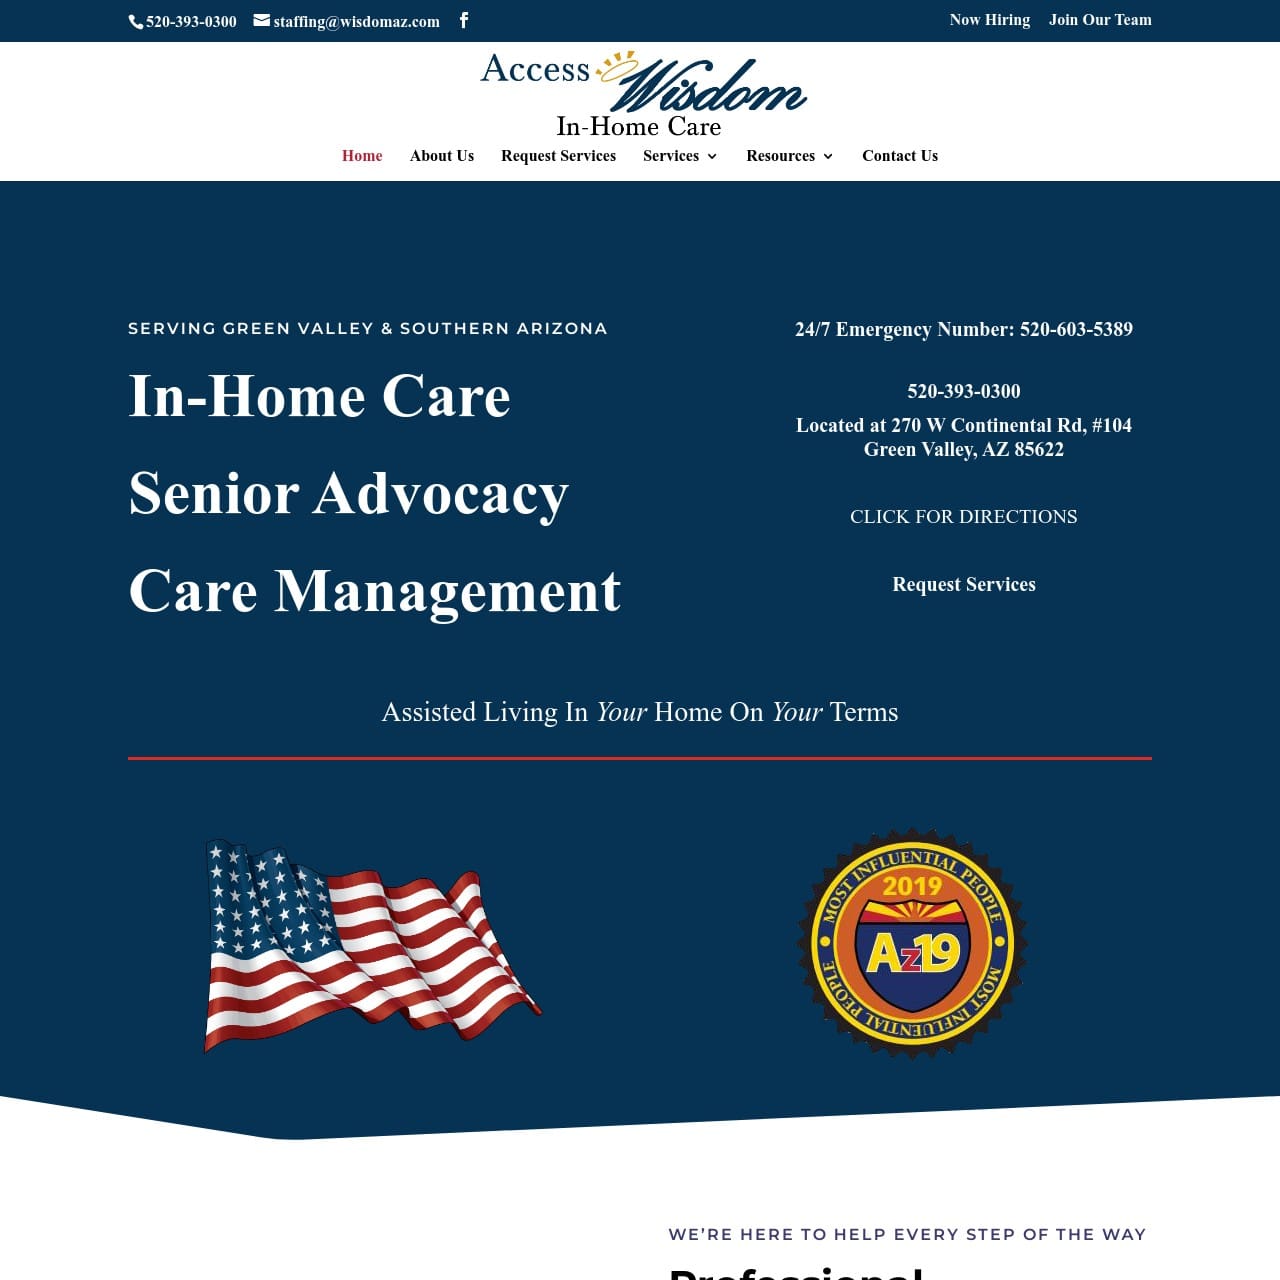 WISDOM AZ Portfolio: Witness the transformation as we revamp Access Wisdom In-Home Care's website, providing a secure and seamless online platform for an elevated care experience.